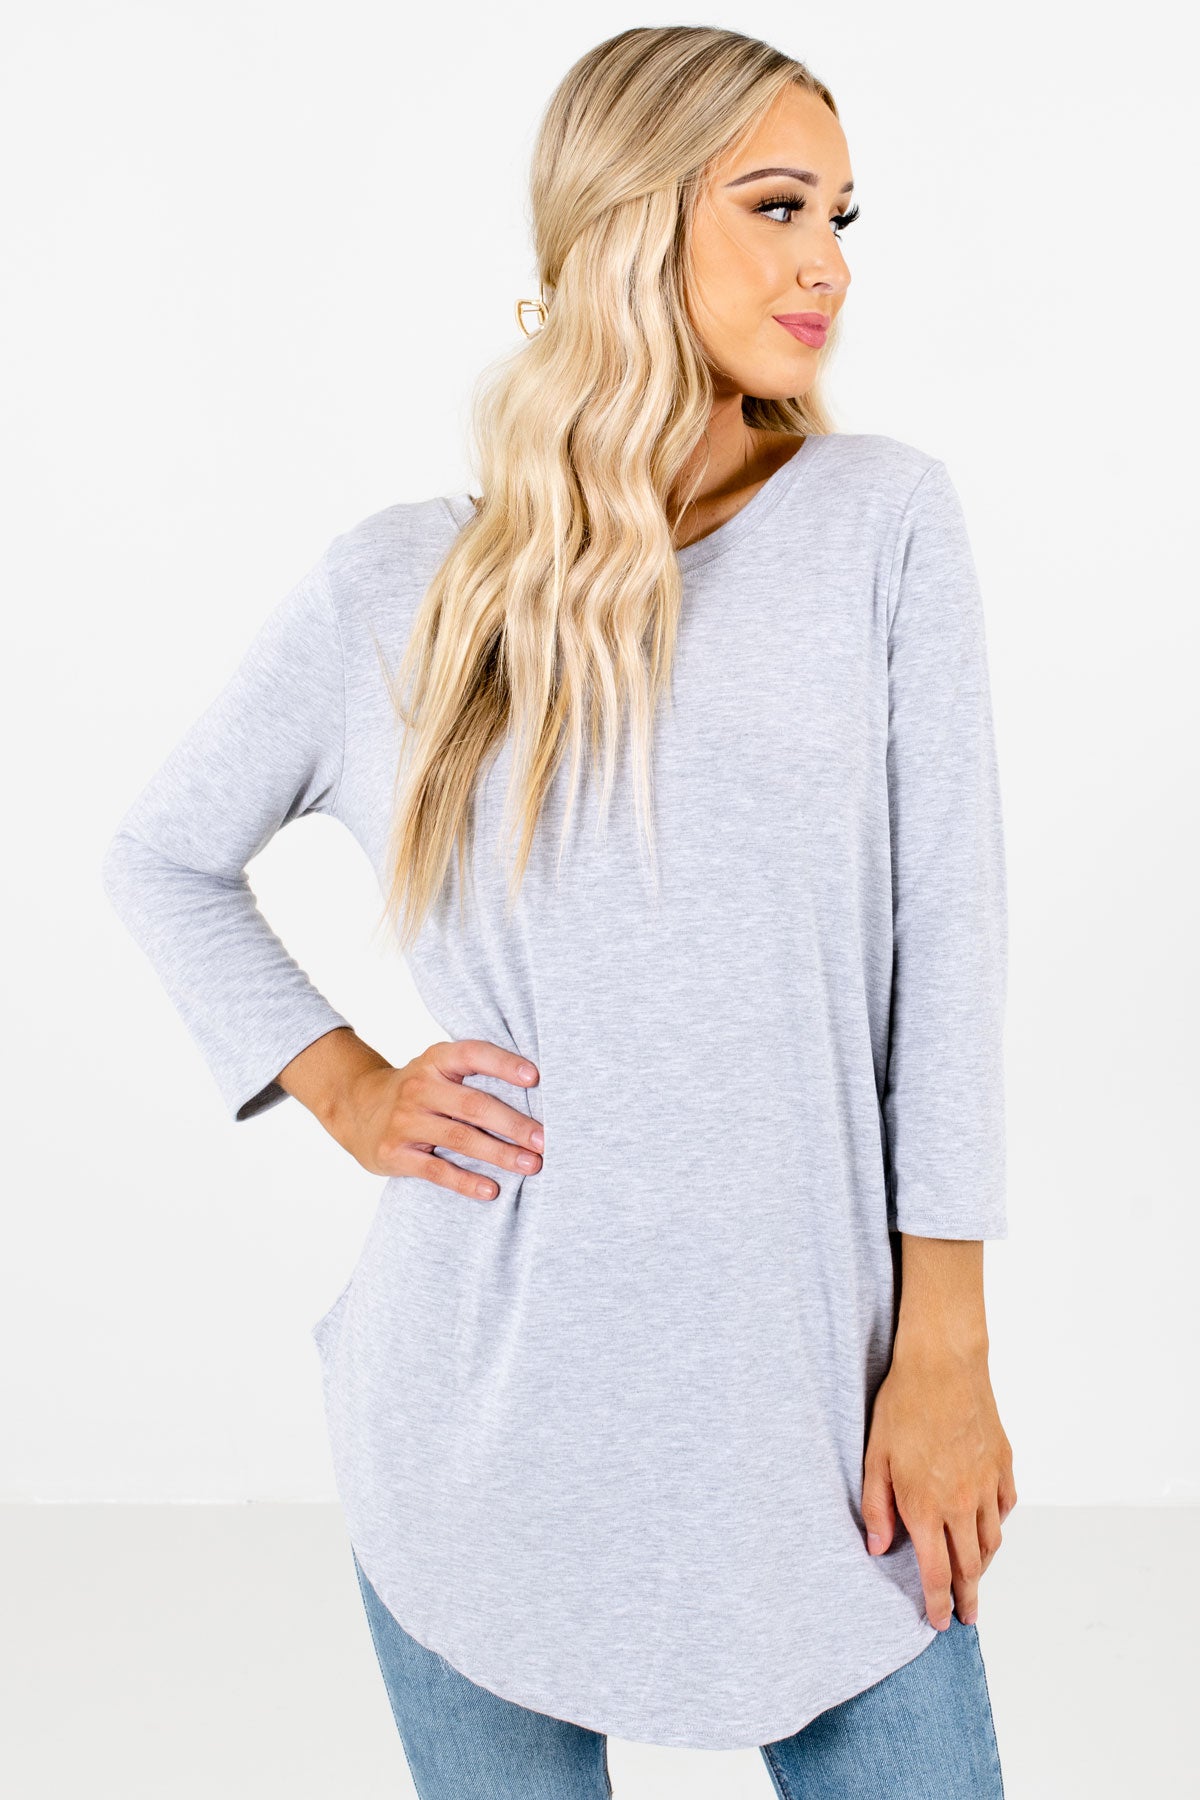 Heather Gray ¾ Length Sleeve Boutique Tops for Women